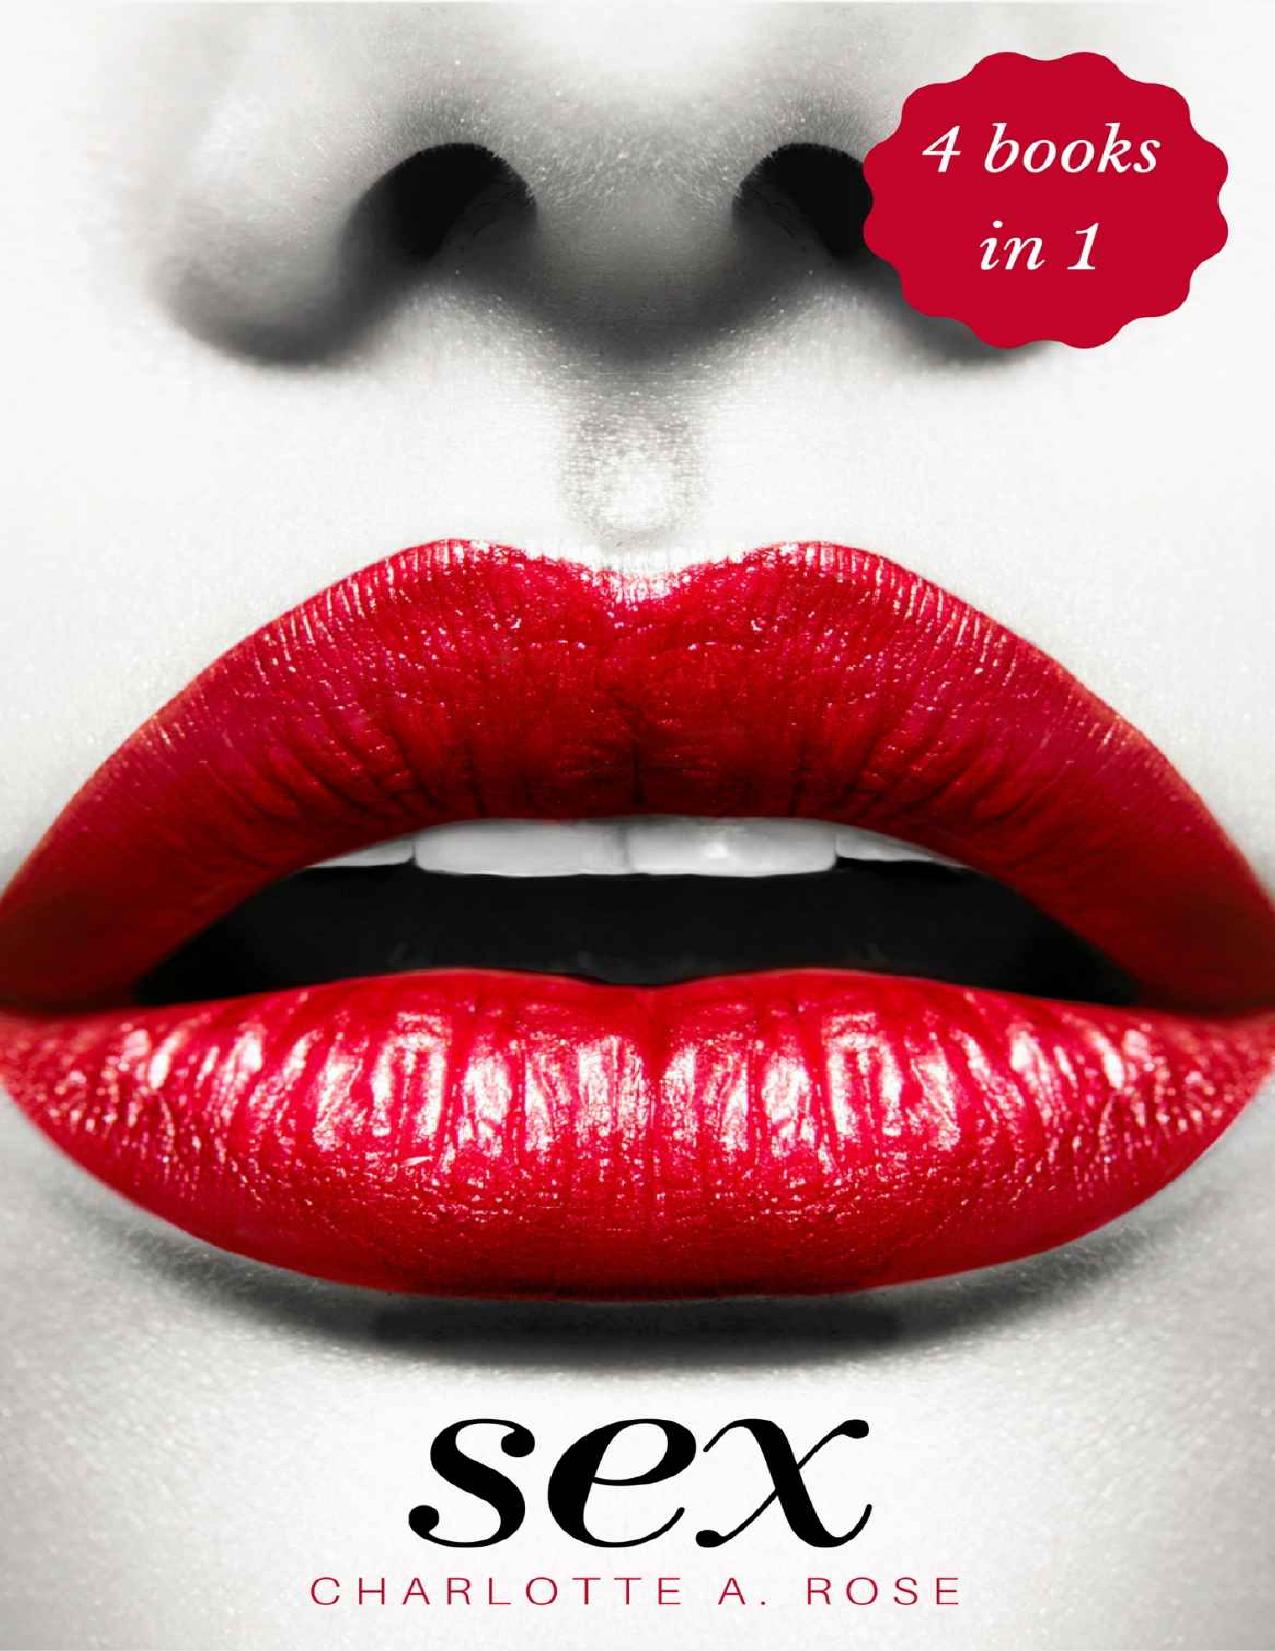 Sex: 4 Books in 1 (Tantric Sex, Kama Sutra, Dirty Talk & Sex Positions) by Charlotte A. Rose